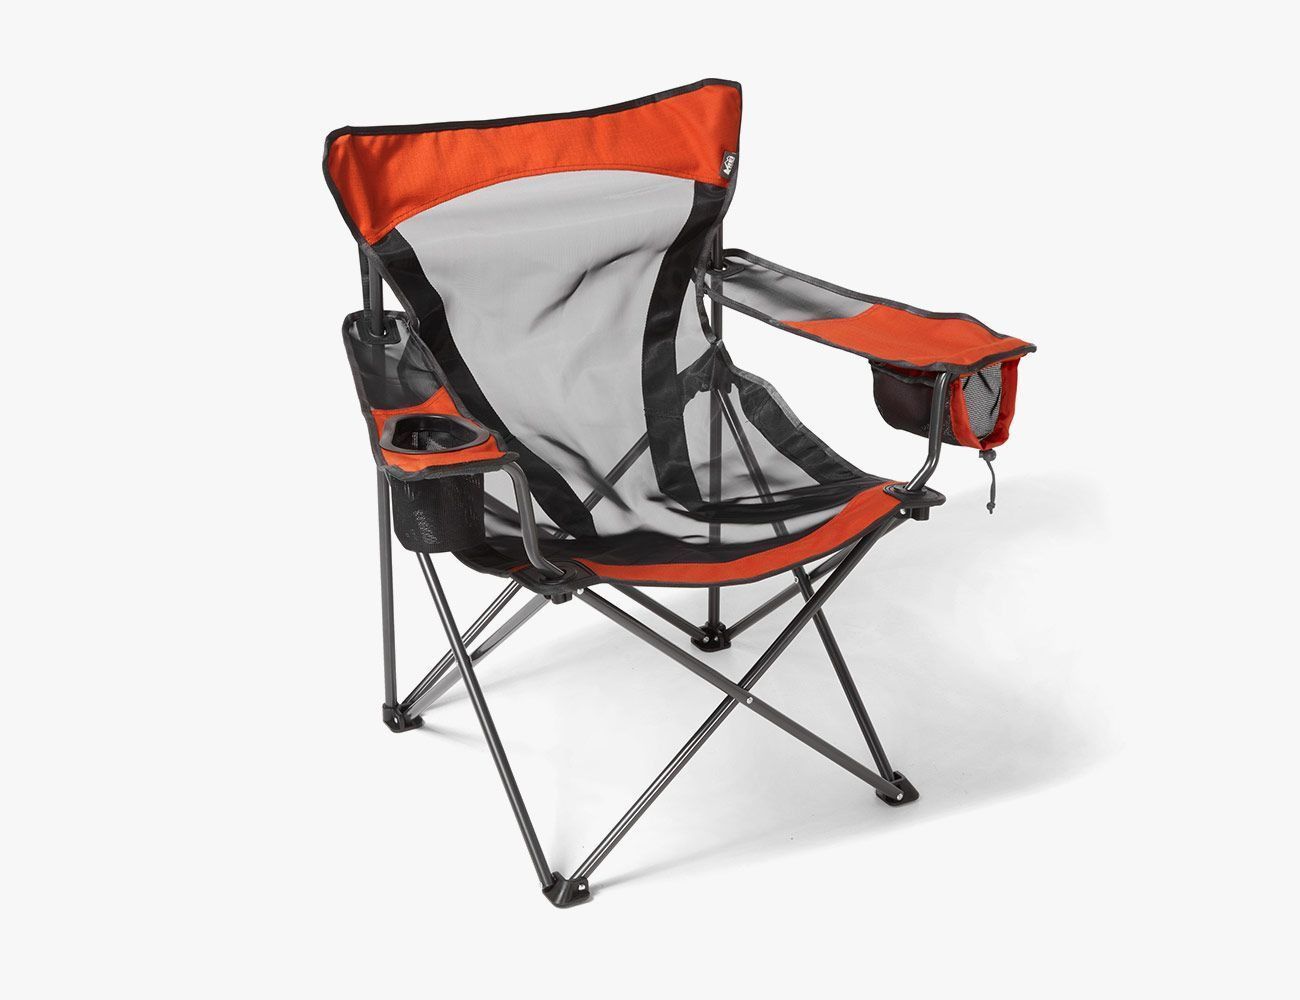 55 x 66 x 51 cm, Grey Folding Camp Chair Sunbed Lightweight Durable Outdoor Seat Perfect For Camping Beach Festivals Garden Caravan Trips Fishing BBQ With Carry Bag Light Portable Adults Kids 